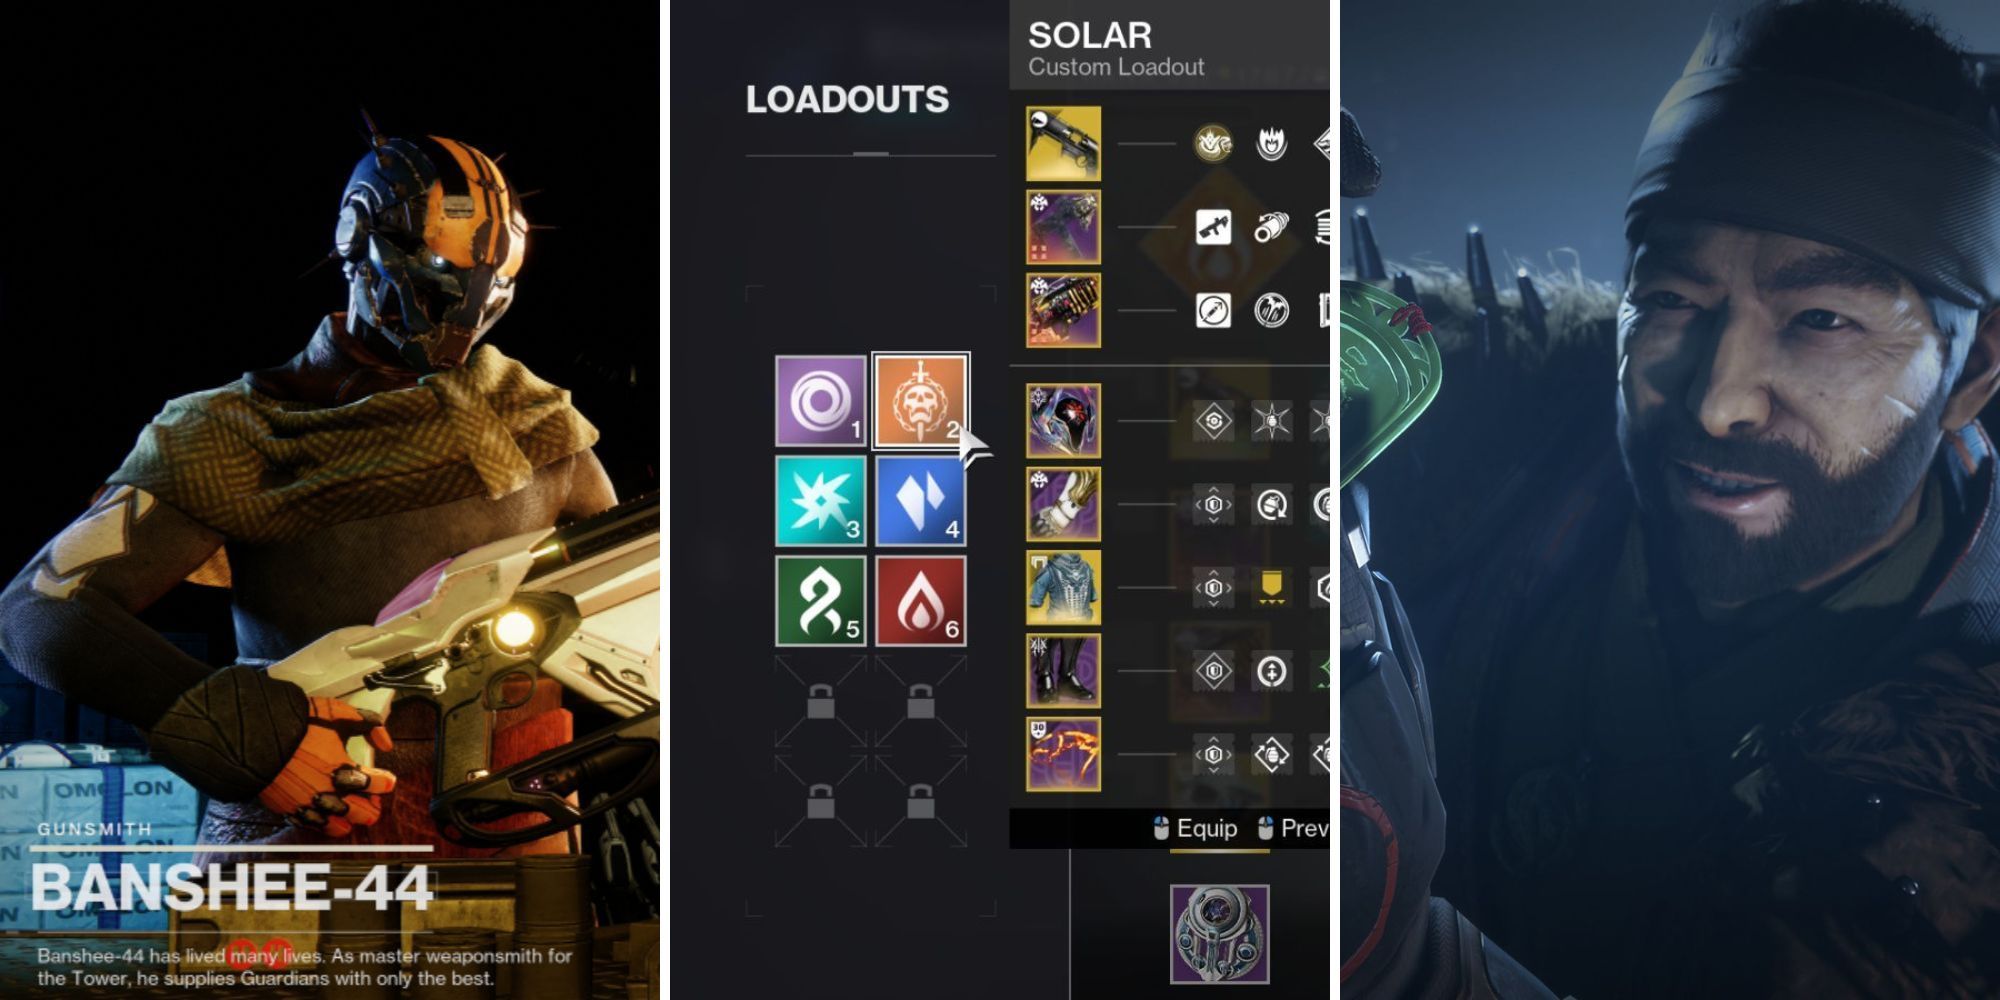 A grid of images showing BANSHEE-44, loadouts and the Drifter in Destiny 2